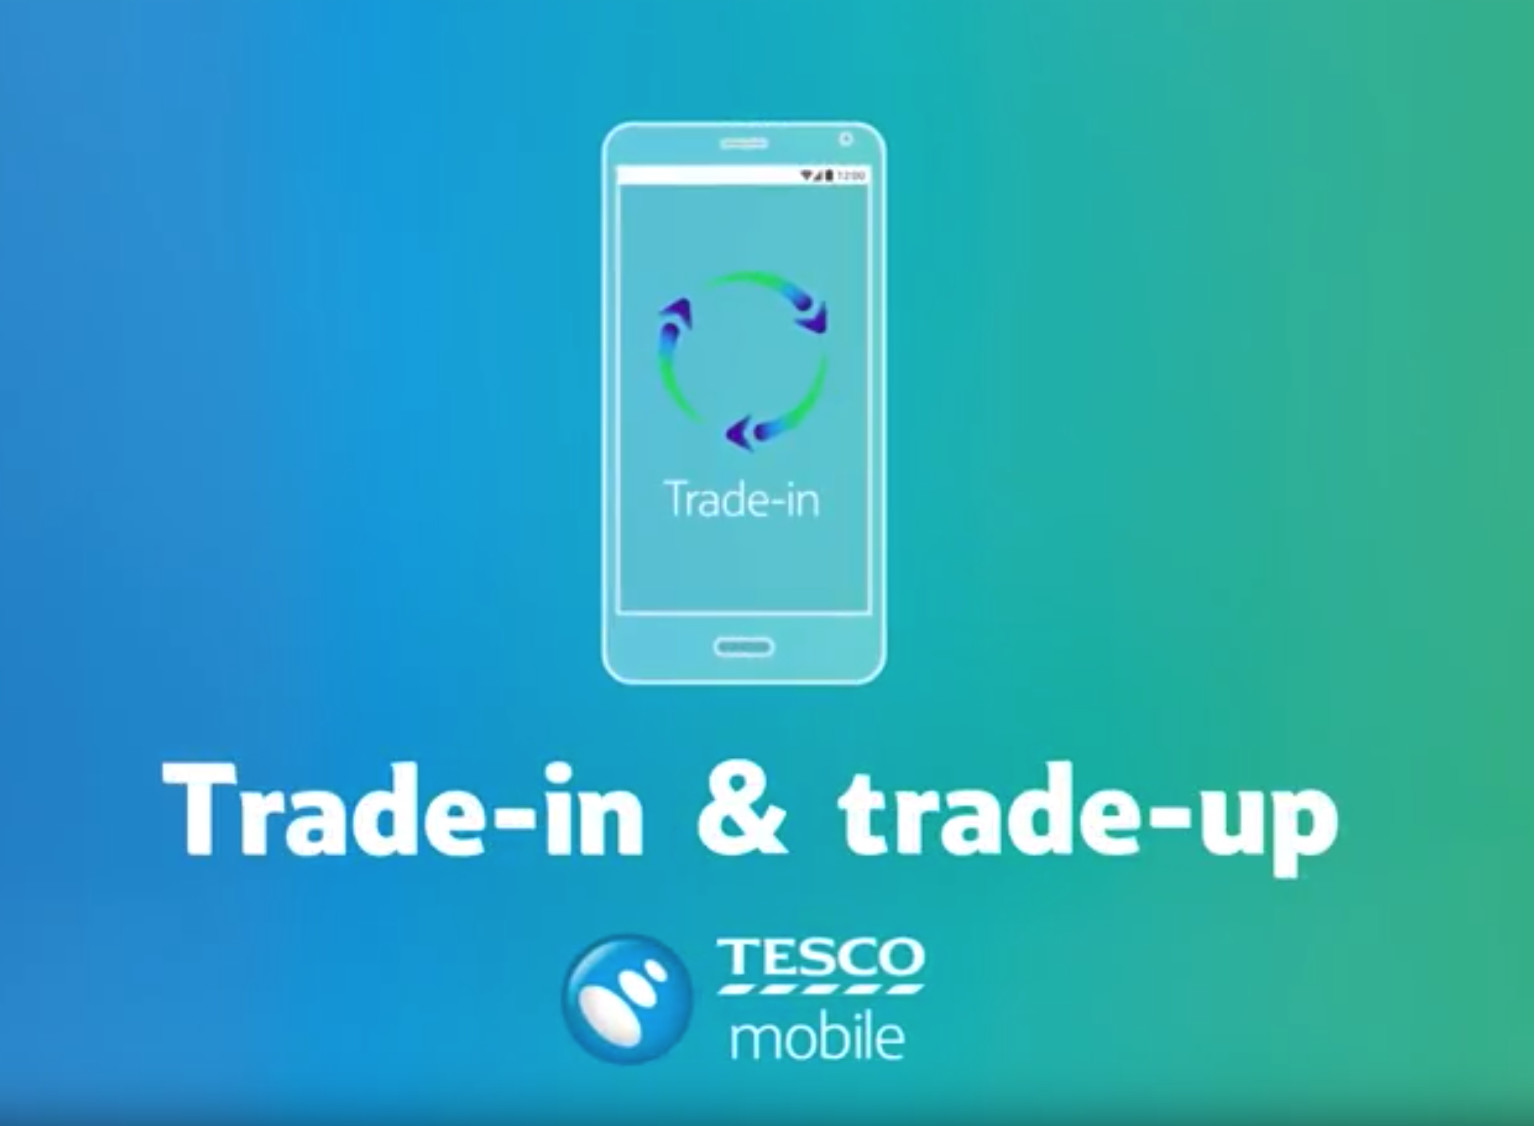 Tesco Mobile Trading Up Promotion